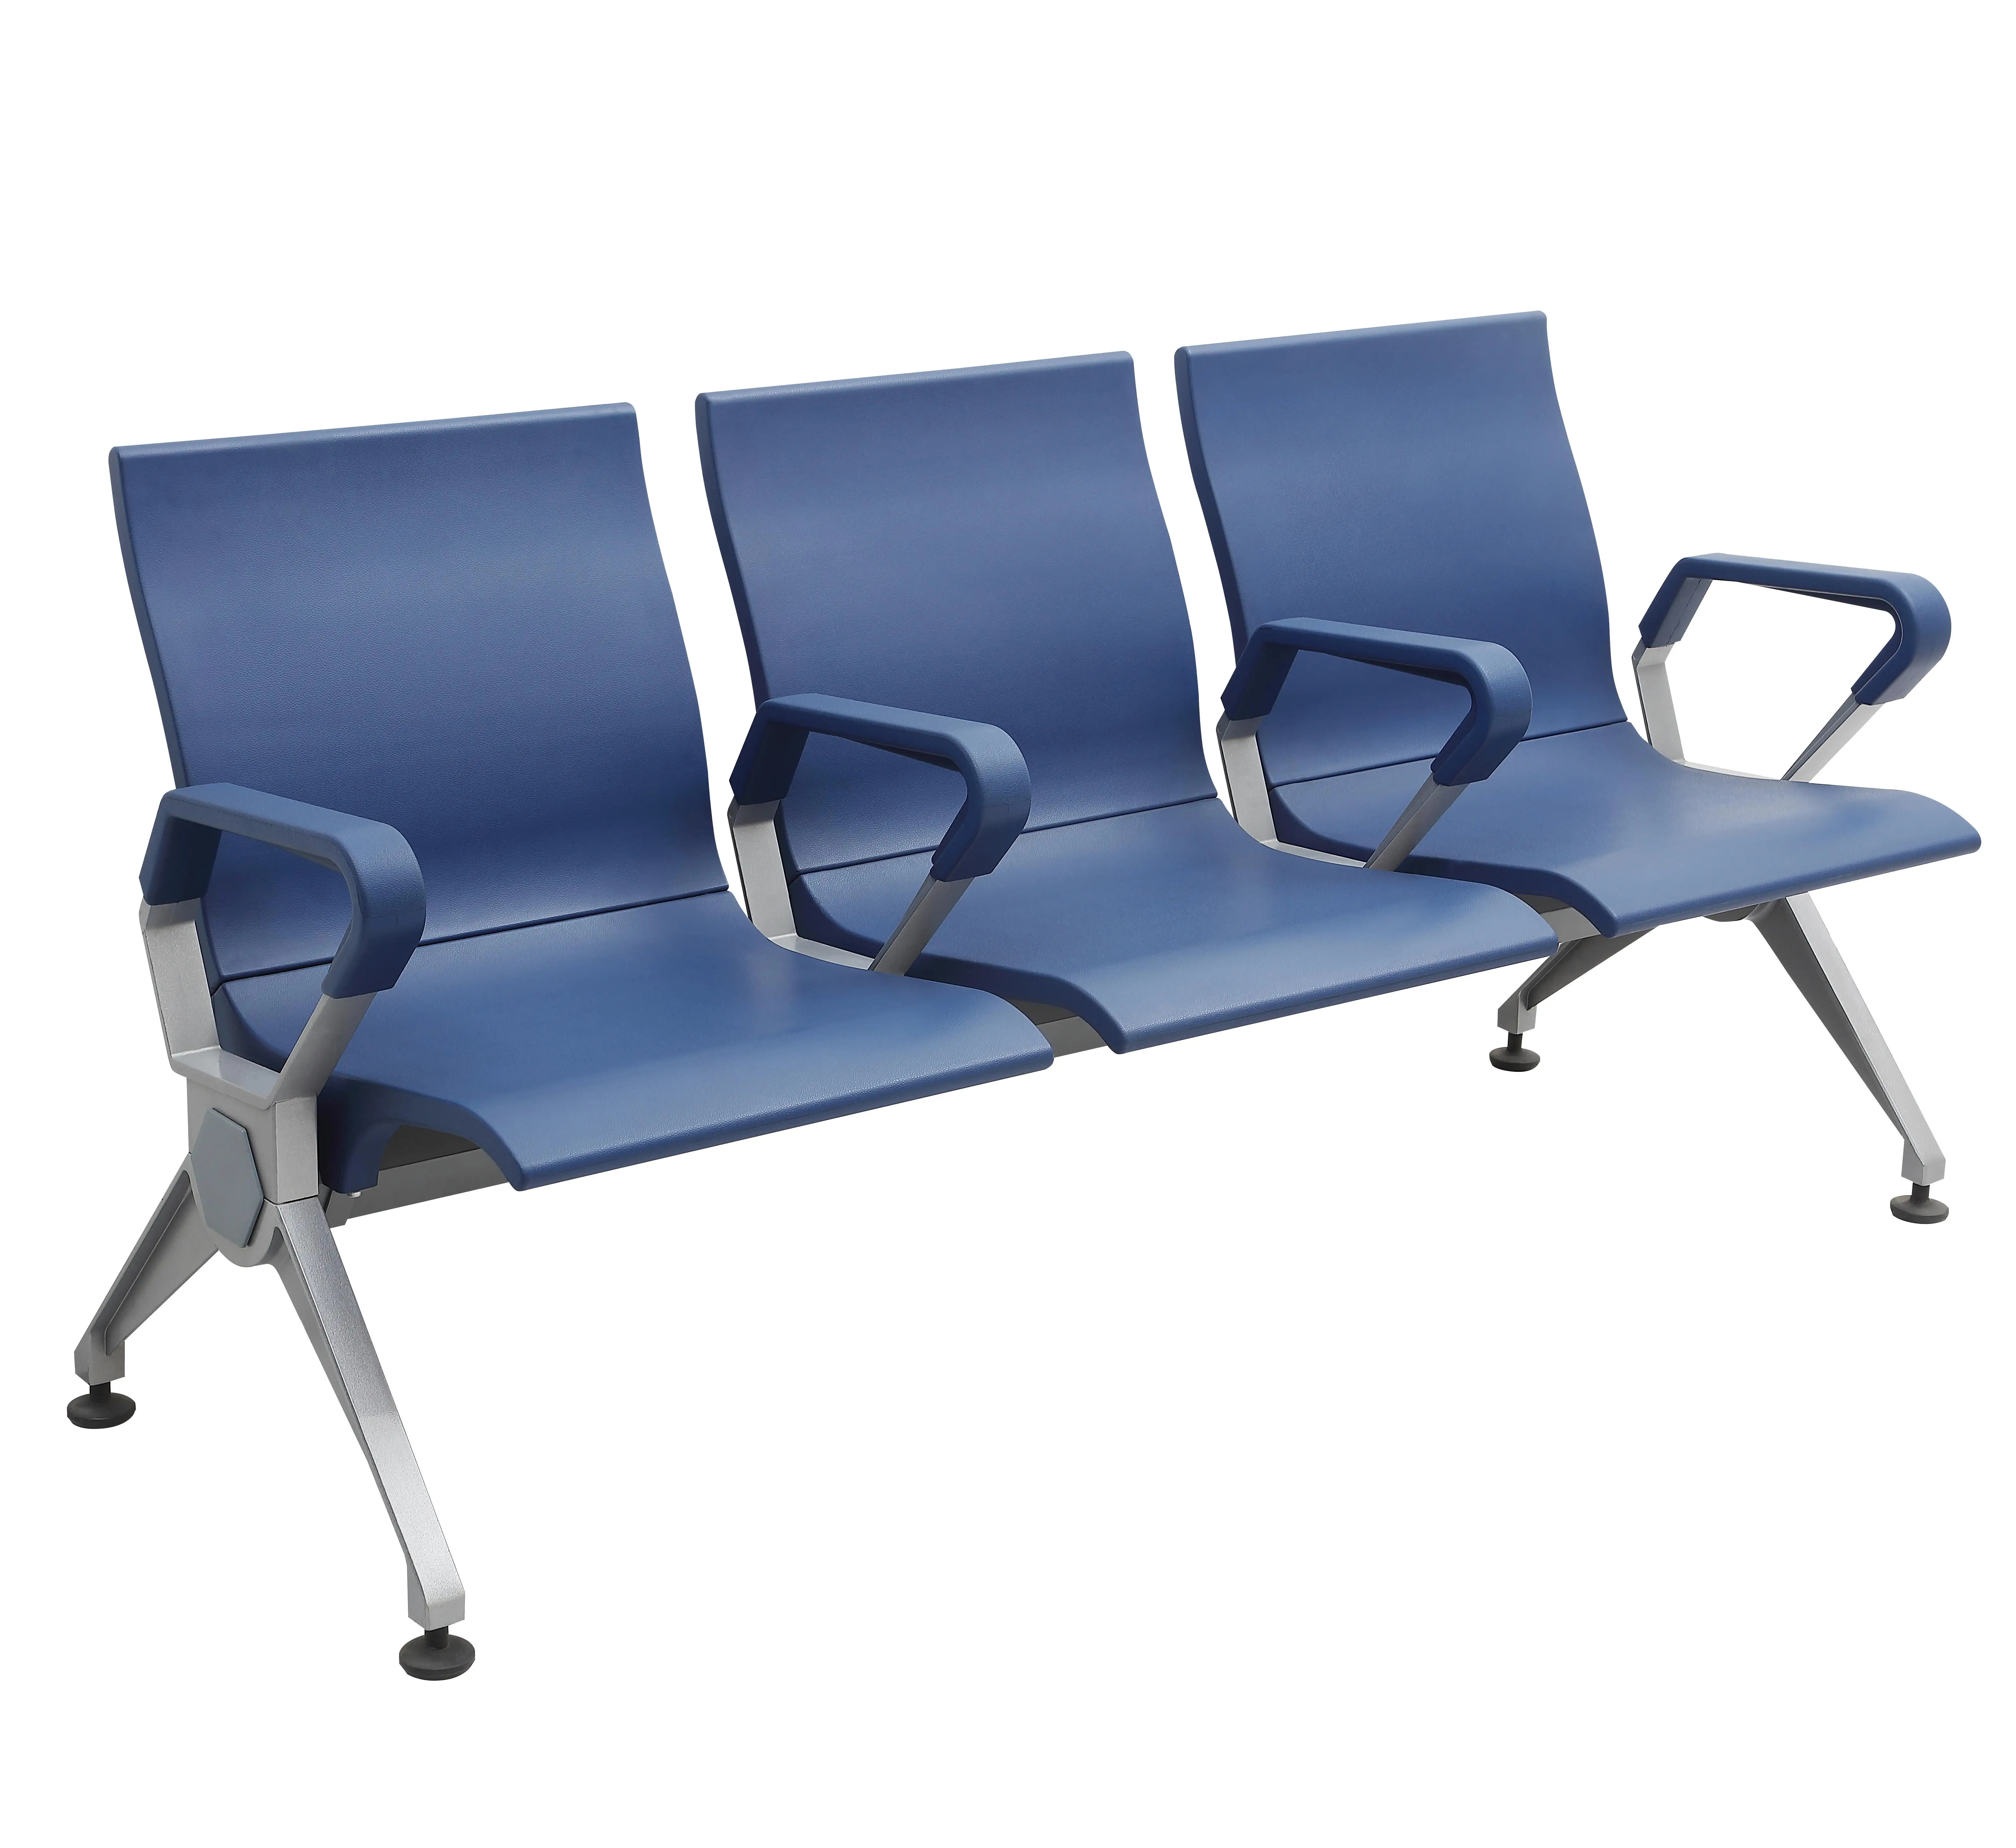 High Quality 3 Seater Waiting Chair Airport Seat Waiting Chairs Office Room Commercial Furniture Hospital Waiting Chairs